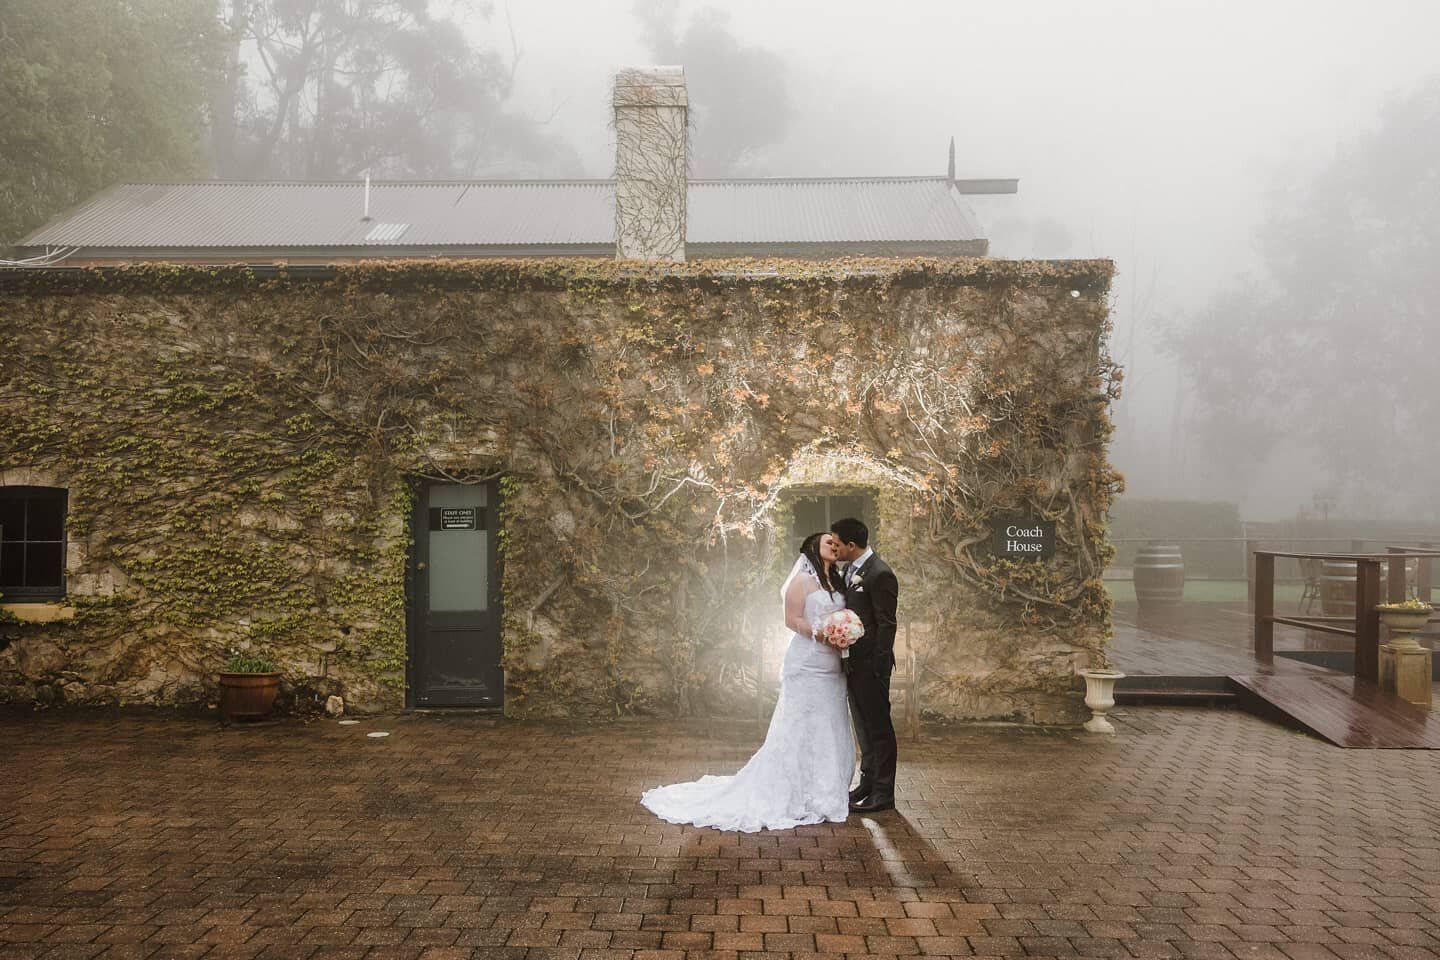 I swear, @mountloftyhouse is in its own little climate bubble. Driving up the hill, ever so suddenly, you enter a layer of fog so thick you can't see the rain. It was magical and other worldly working in it for Lisa &amp; Hayden's elopement with @our